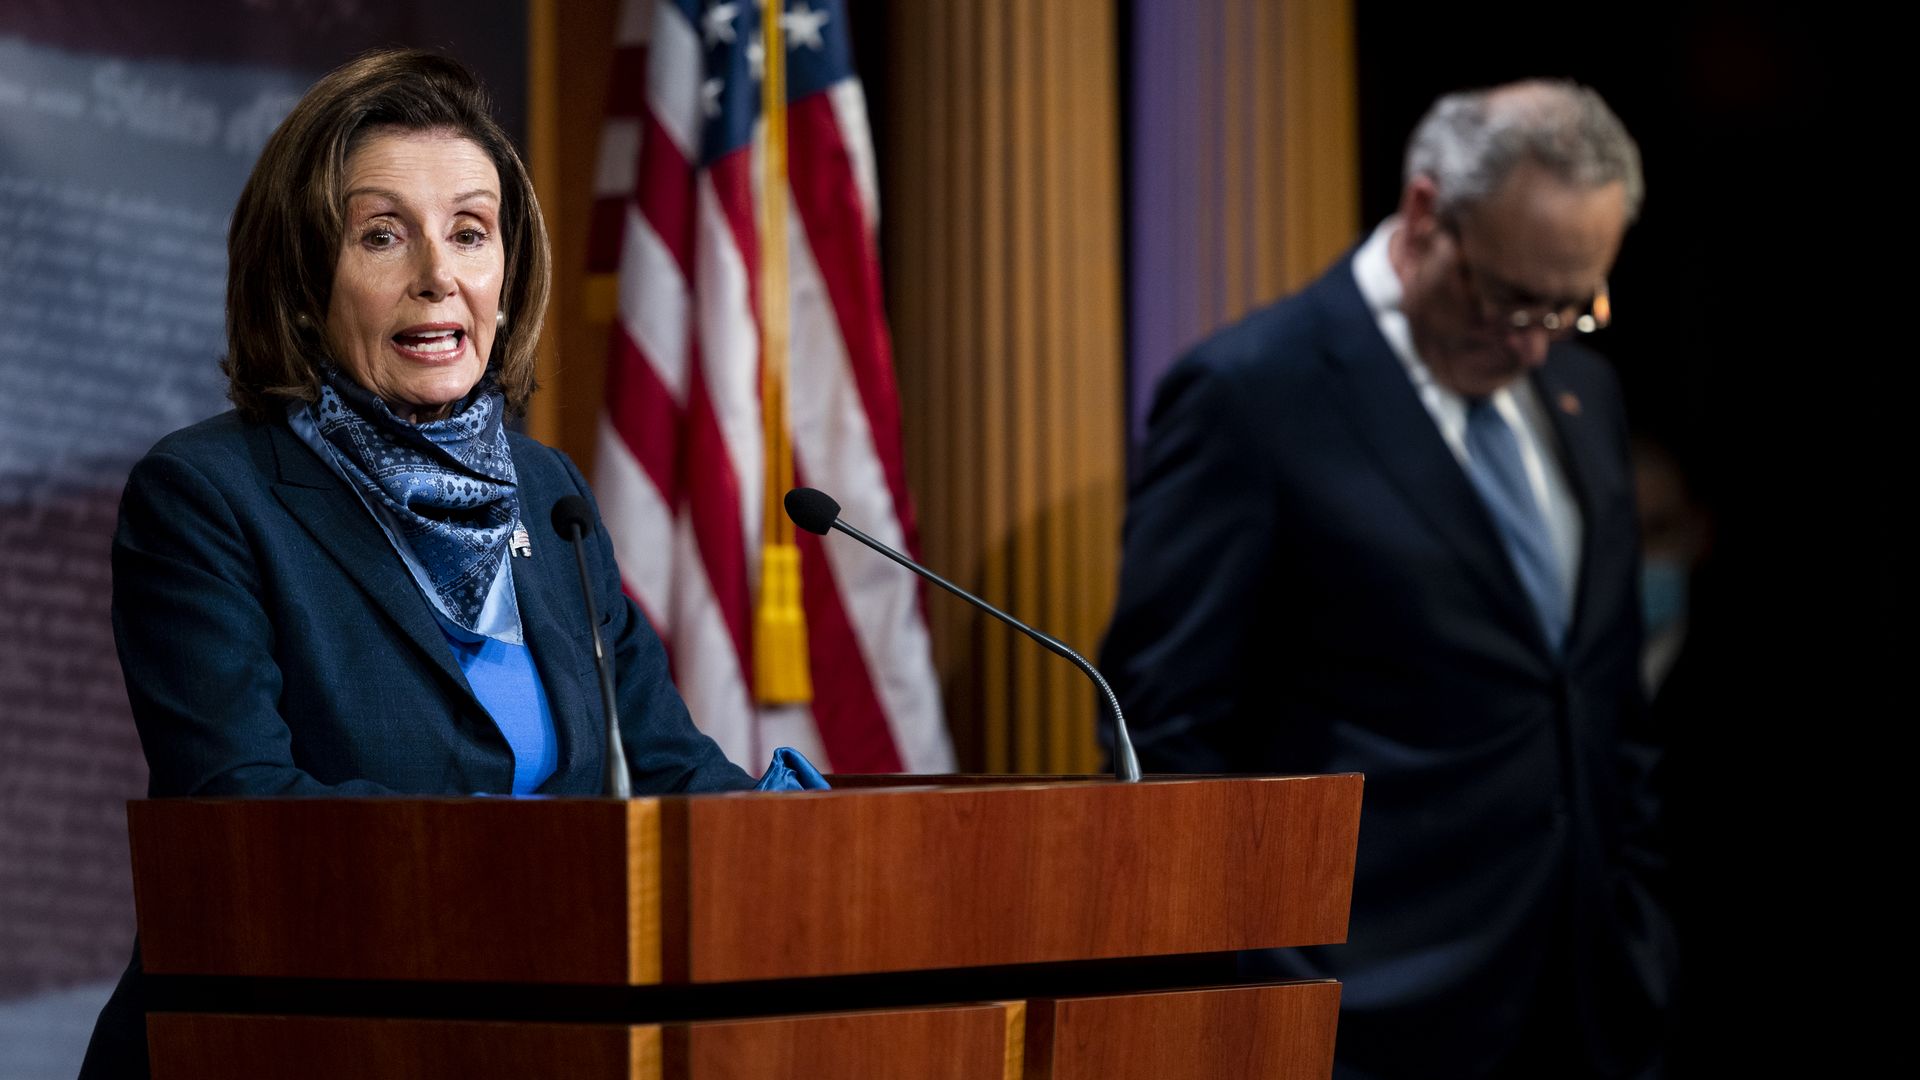  Speaker of the House Nancy Pelosi, D-Calif.,and Senate Minority Leader Chuck Schumer, D-N.Y., hold a socially distanced press conference in the Capitol 